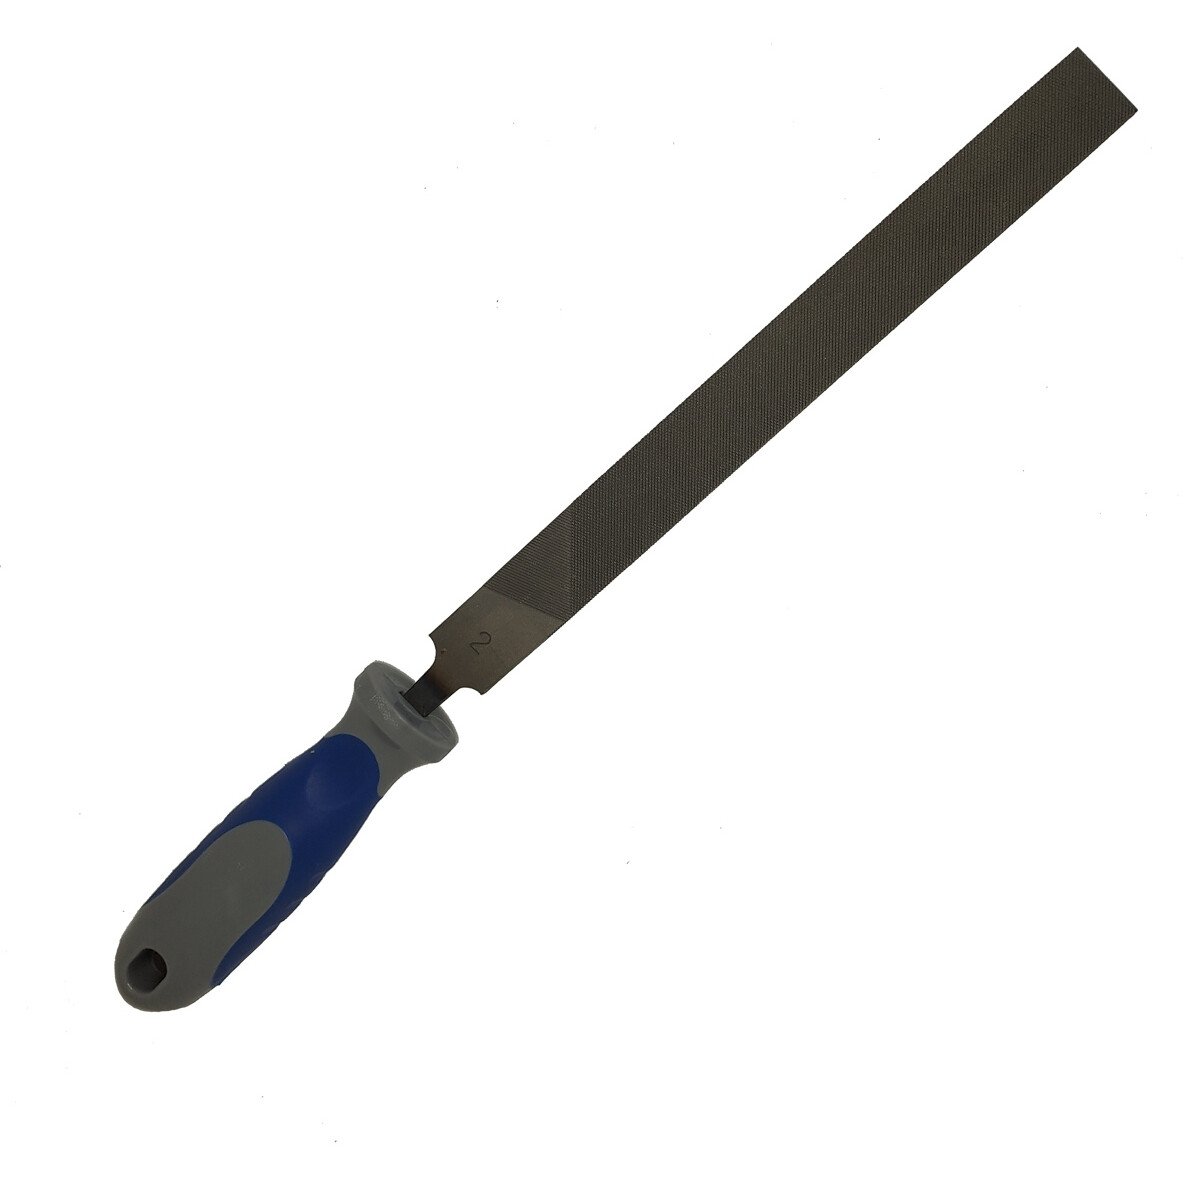 Lawson-HIS FH8HSC 8" Hand Second Cut File with Plastic Handle